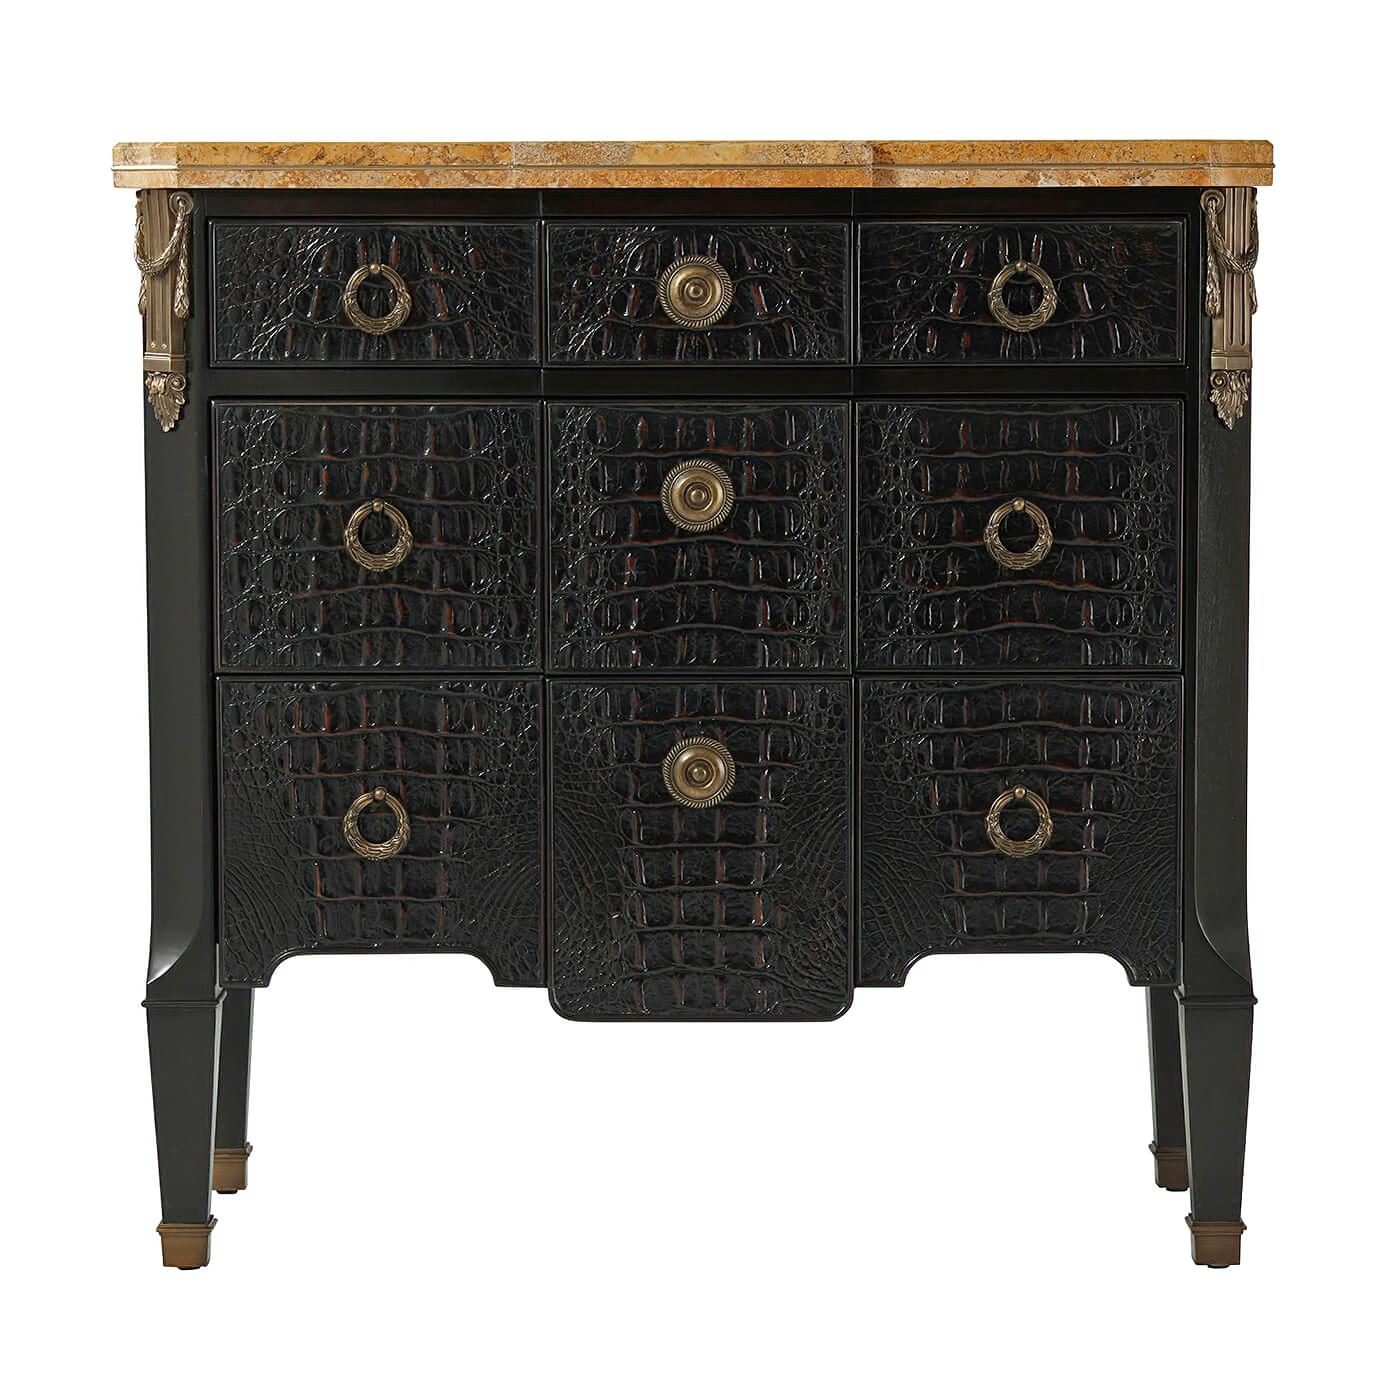 A French neo classic marble top commode small ebonised and Kalahari chest of drawers, the Sahara marble top with brass inlaid edges, above three drawers with brass handles, the canted angles with brass column capitals above square tapering legs. The